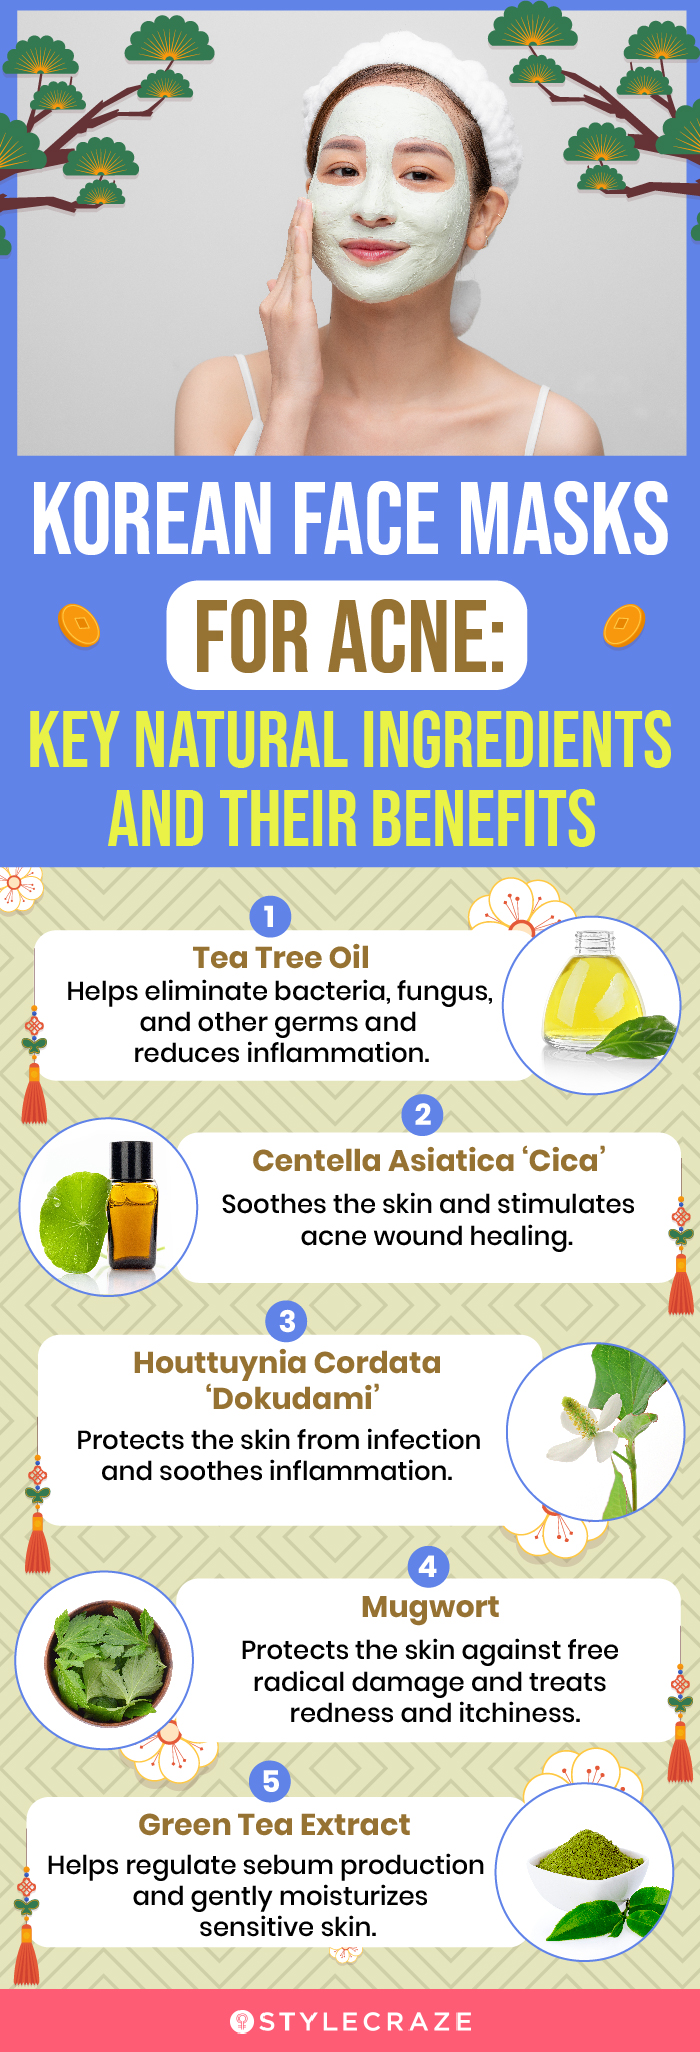 Korean Face Masks for Acne: Key Natural Ingredients and Their Benefits (infographic)